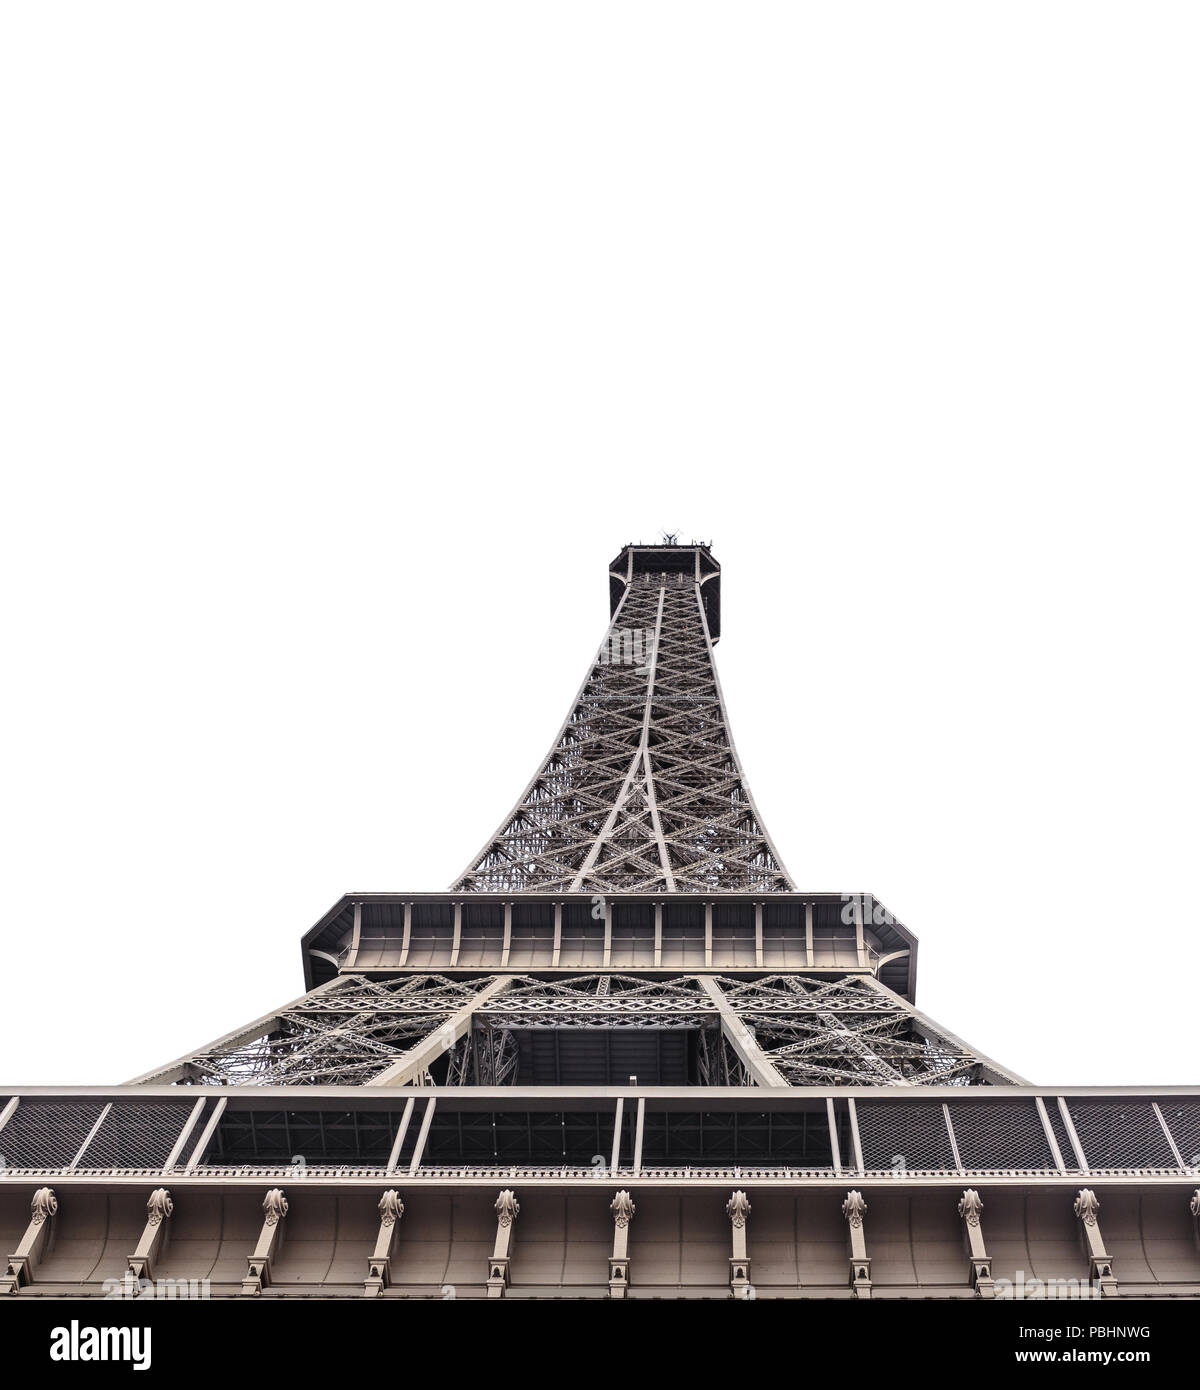 Elements of the Eiffel tower on a white background. Stock Photo